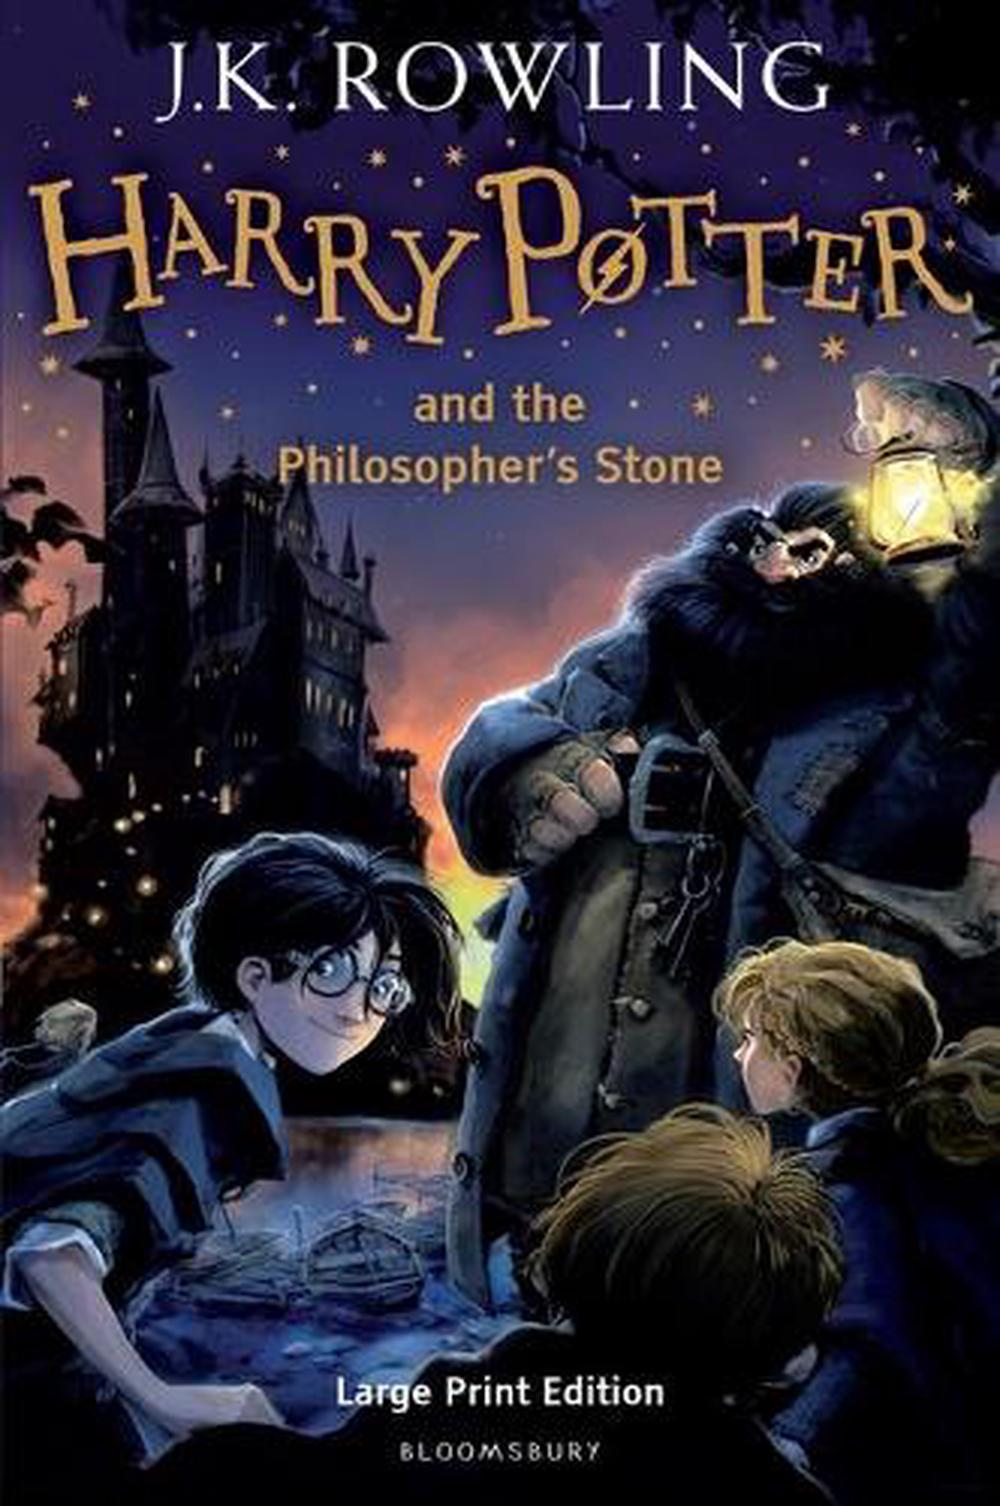 short book review of harry potter and the sorcerer's stone